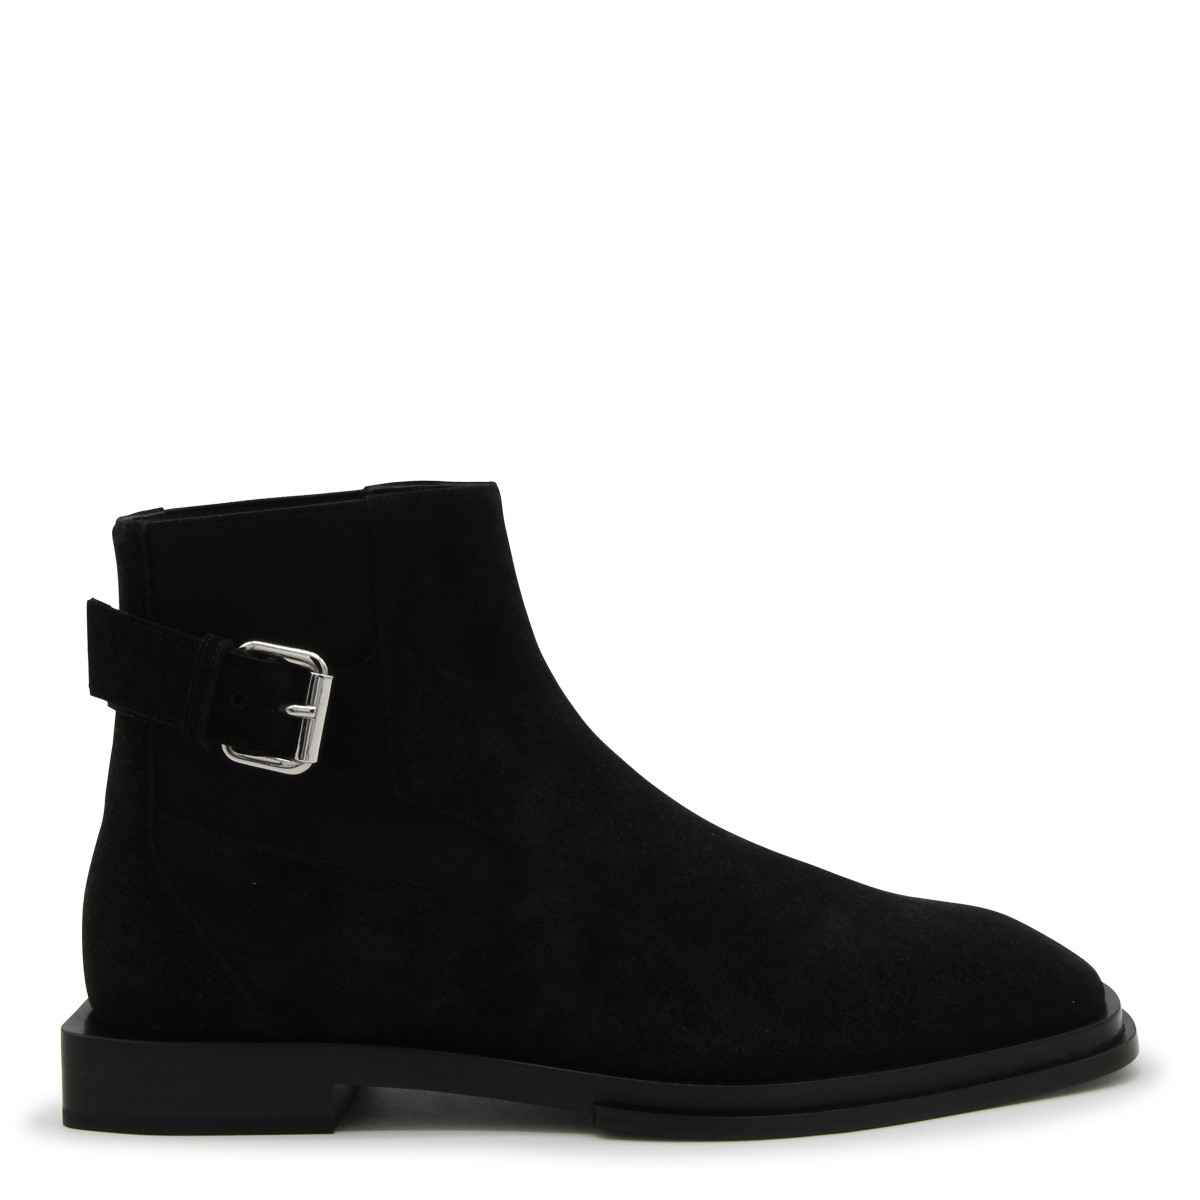 BLACK SUEDE BOOTS